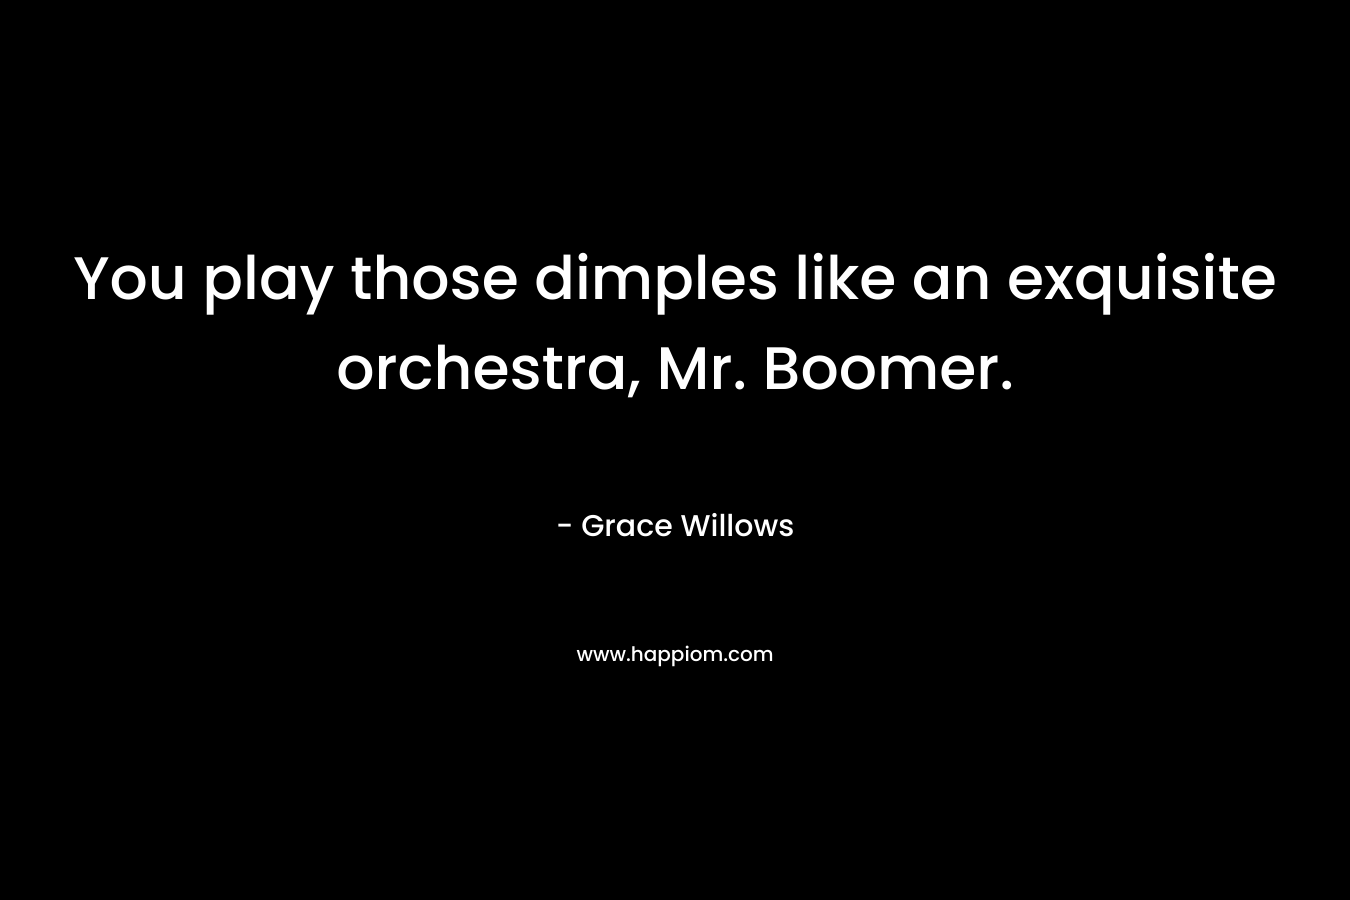 You play those dimples like an exquisite orchestra, Mr. Boomer.